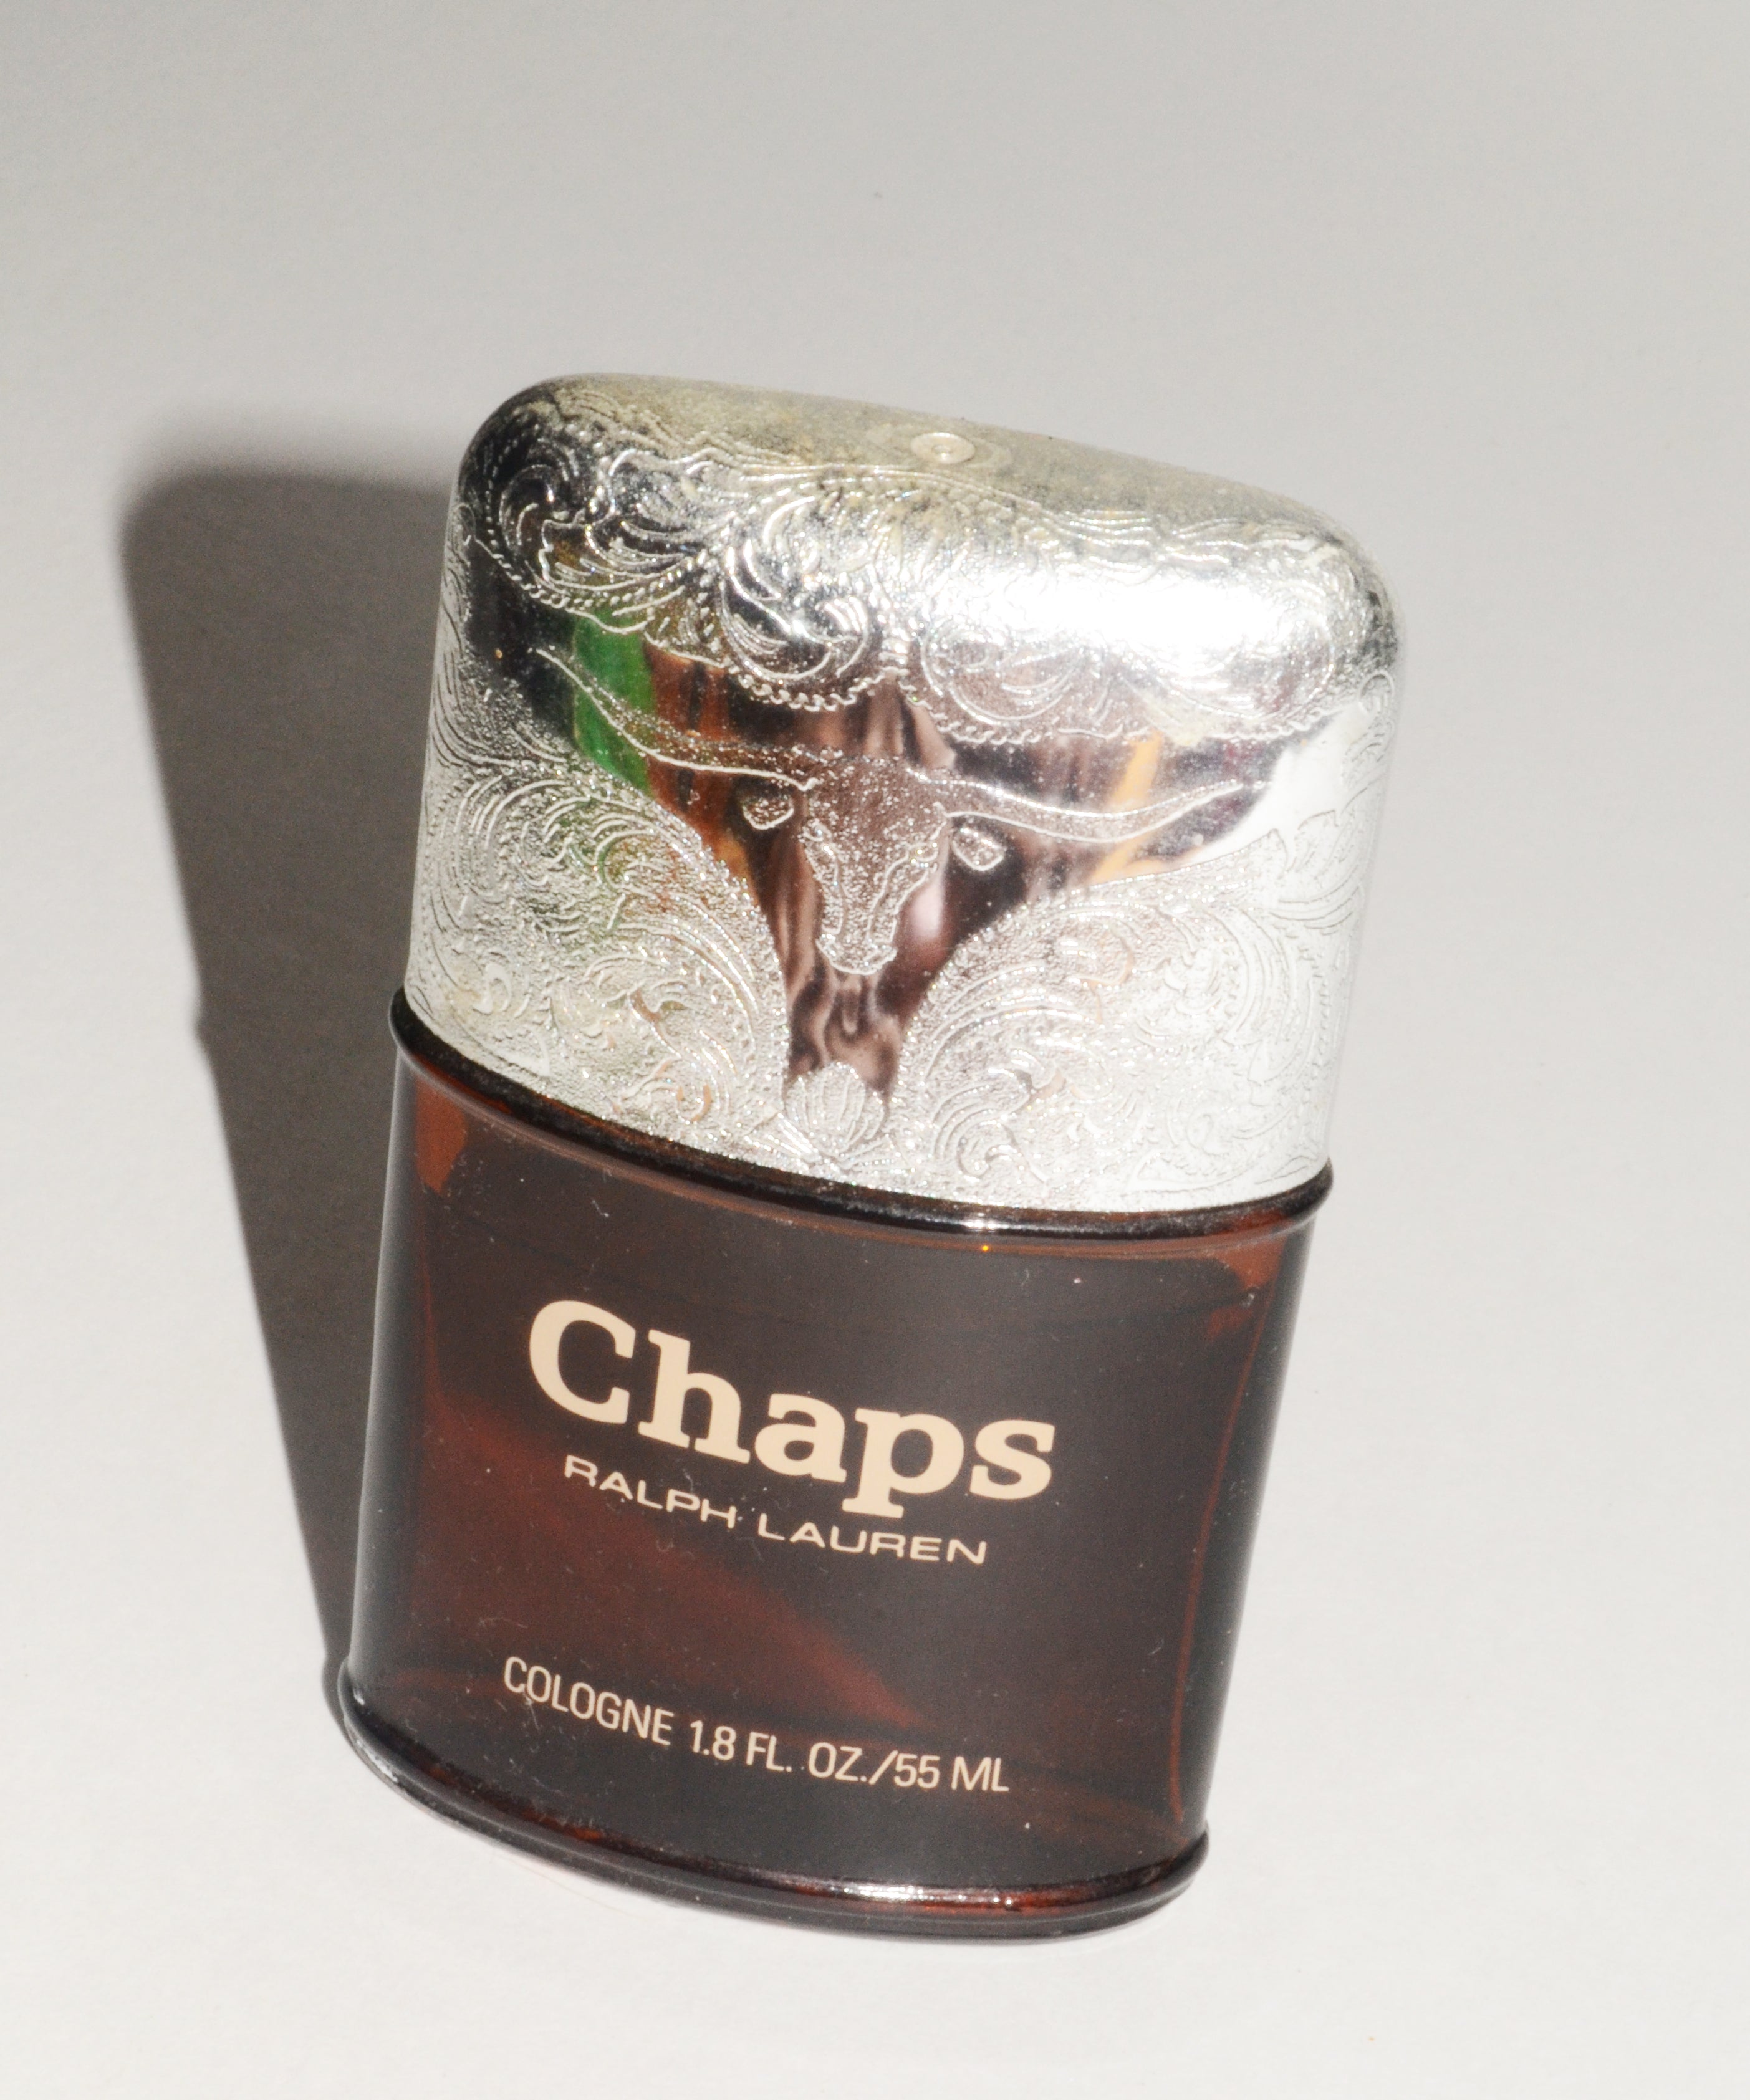 Vintage Chaps Cologne By Ralph Lauren – Quirky Finds